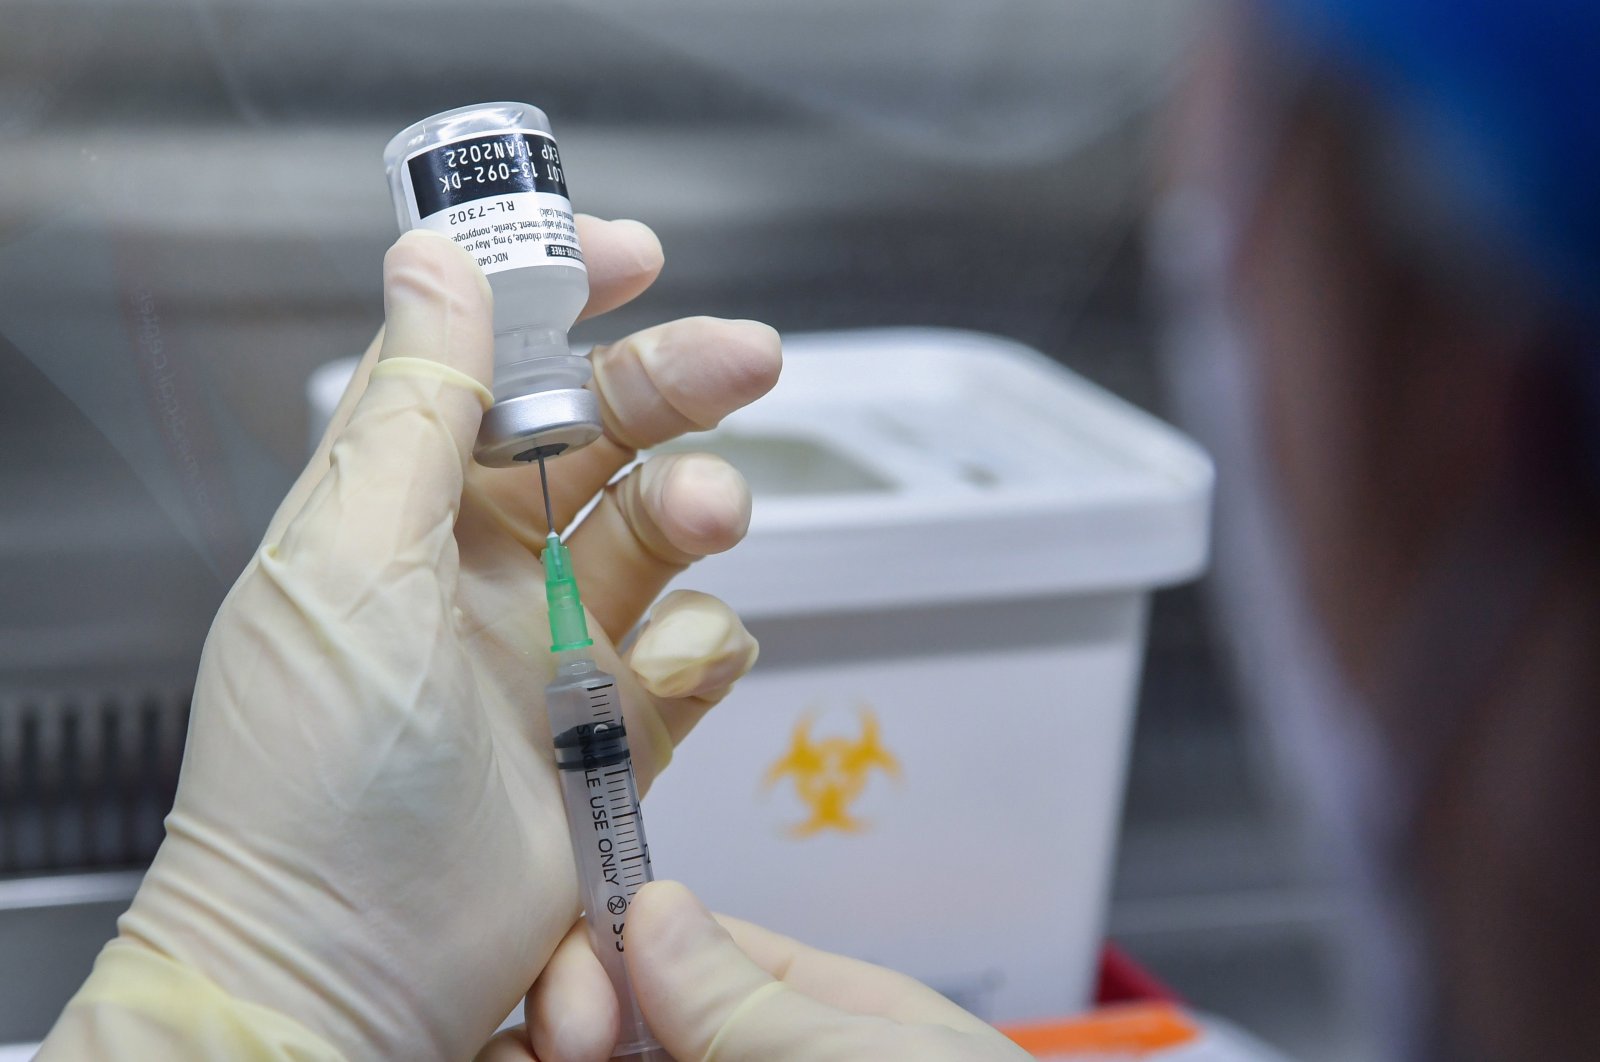 A nurse fills a syringe with a dose of the Pfizer-BioNTech COVID-19 vaccine at the National Medical Center in Seoul, South Korea, Feb. 27, 2021. (EPA Photo)